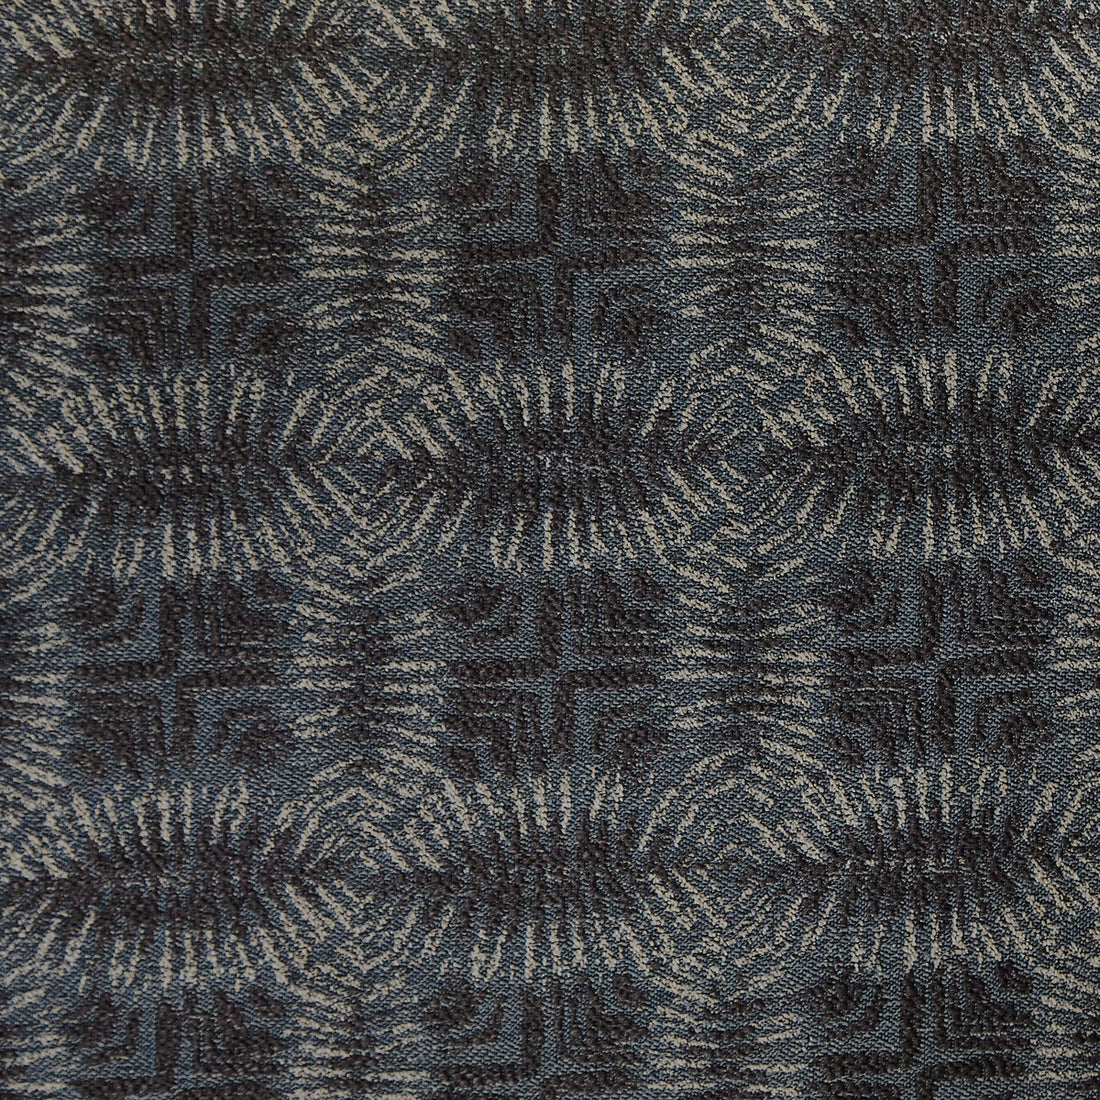 Calypso fabric in midnight color - pattern GWF-3204.550.0 - by Lee Jofa Modern in the Allegra Hicks Islands collection